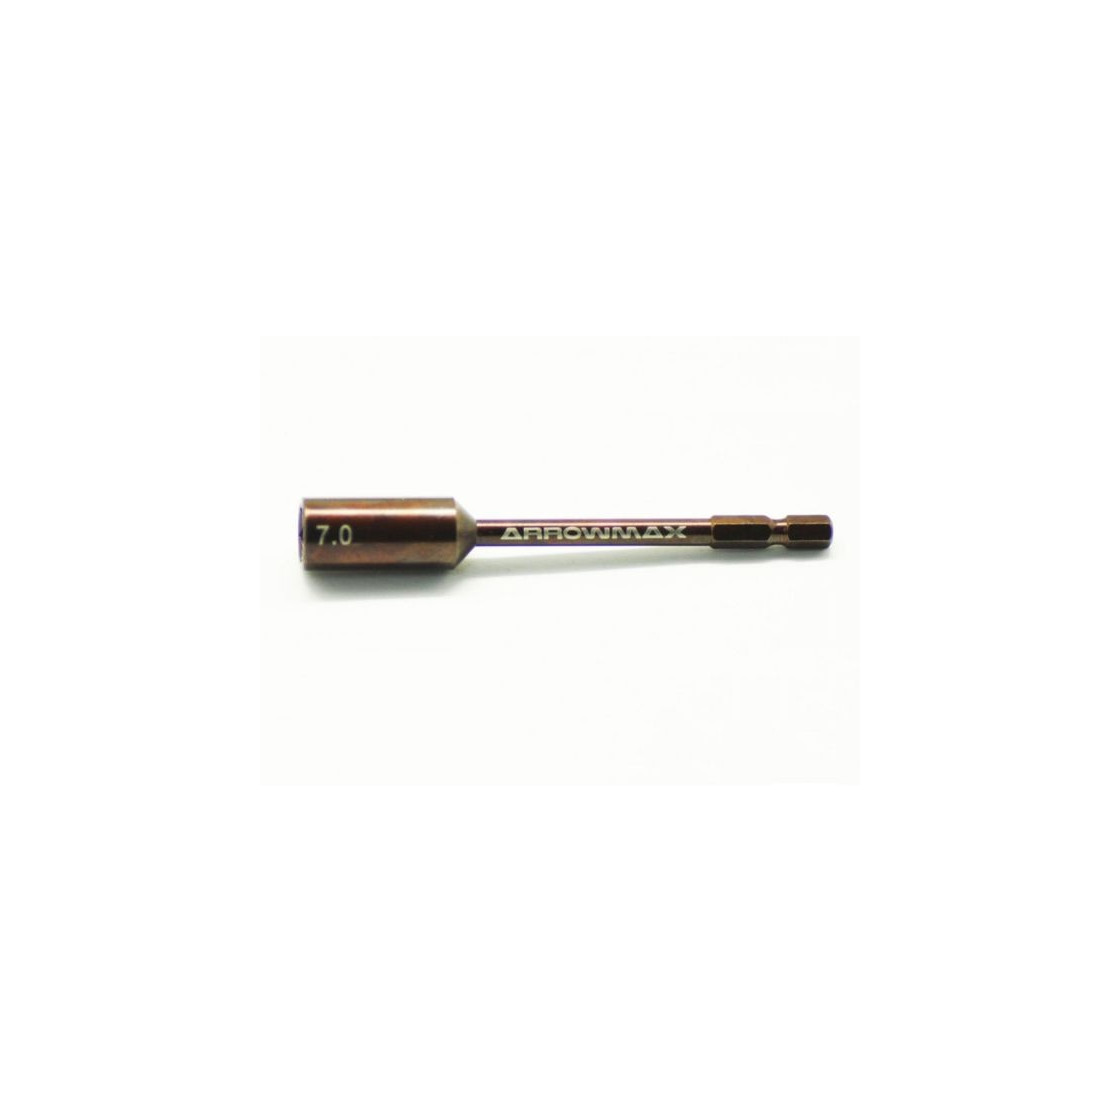 NUT DRIVER 7.0 X 70MM  QUICK DRIVE TIP